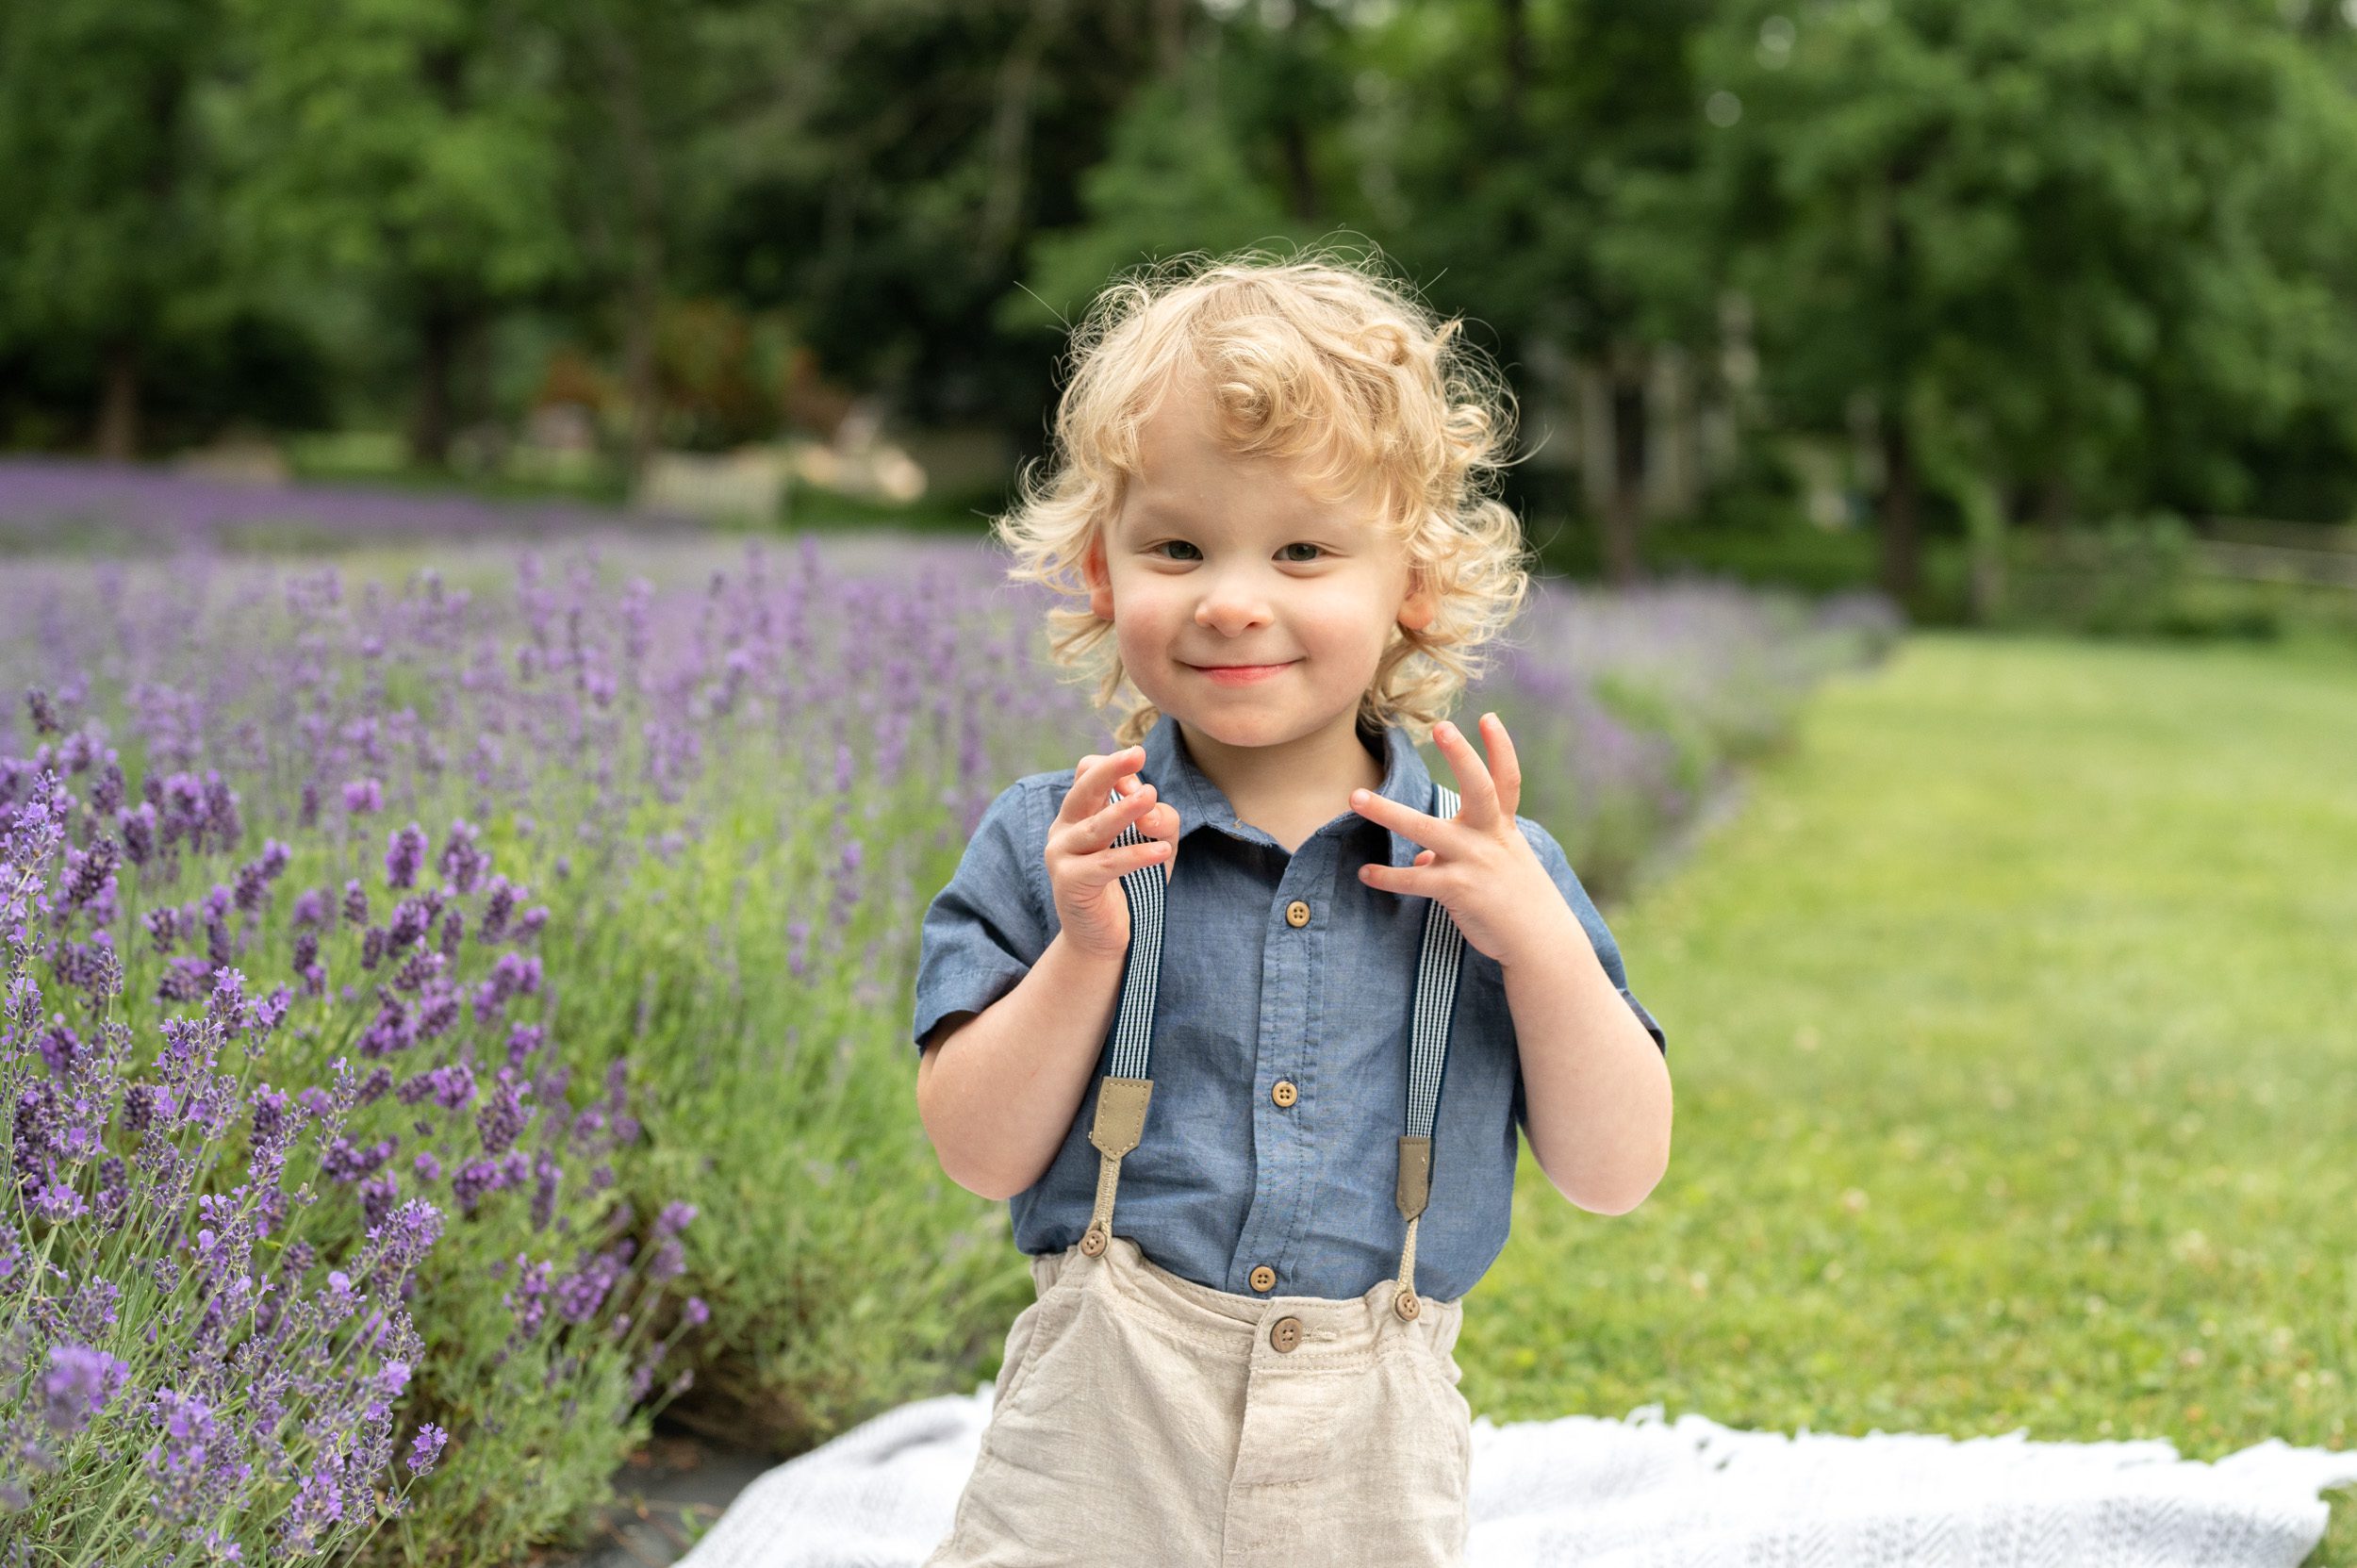 a little boy sitting in front of a field of purple lavender and smiling at the camera as he pulls on his suspenders during a family photo session